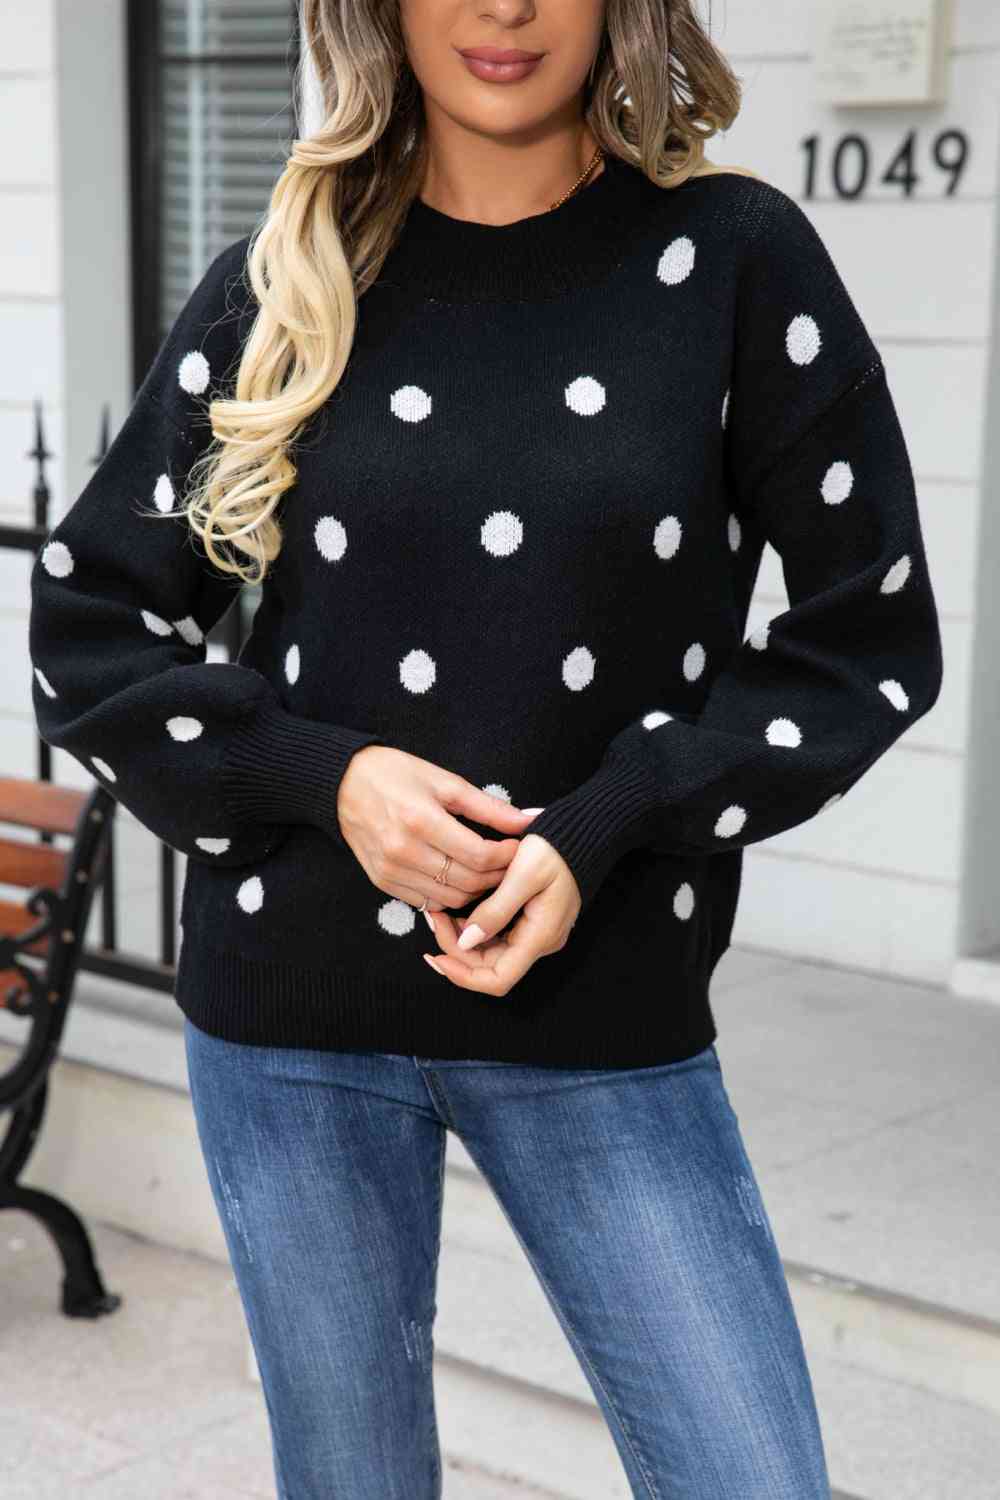 Woven Right Polka Dot Round Neck Dropped Shoulder Sweater Black